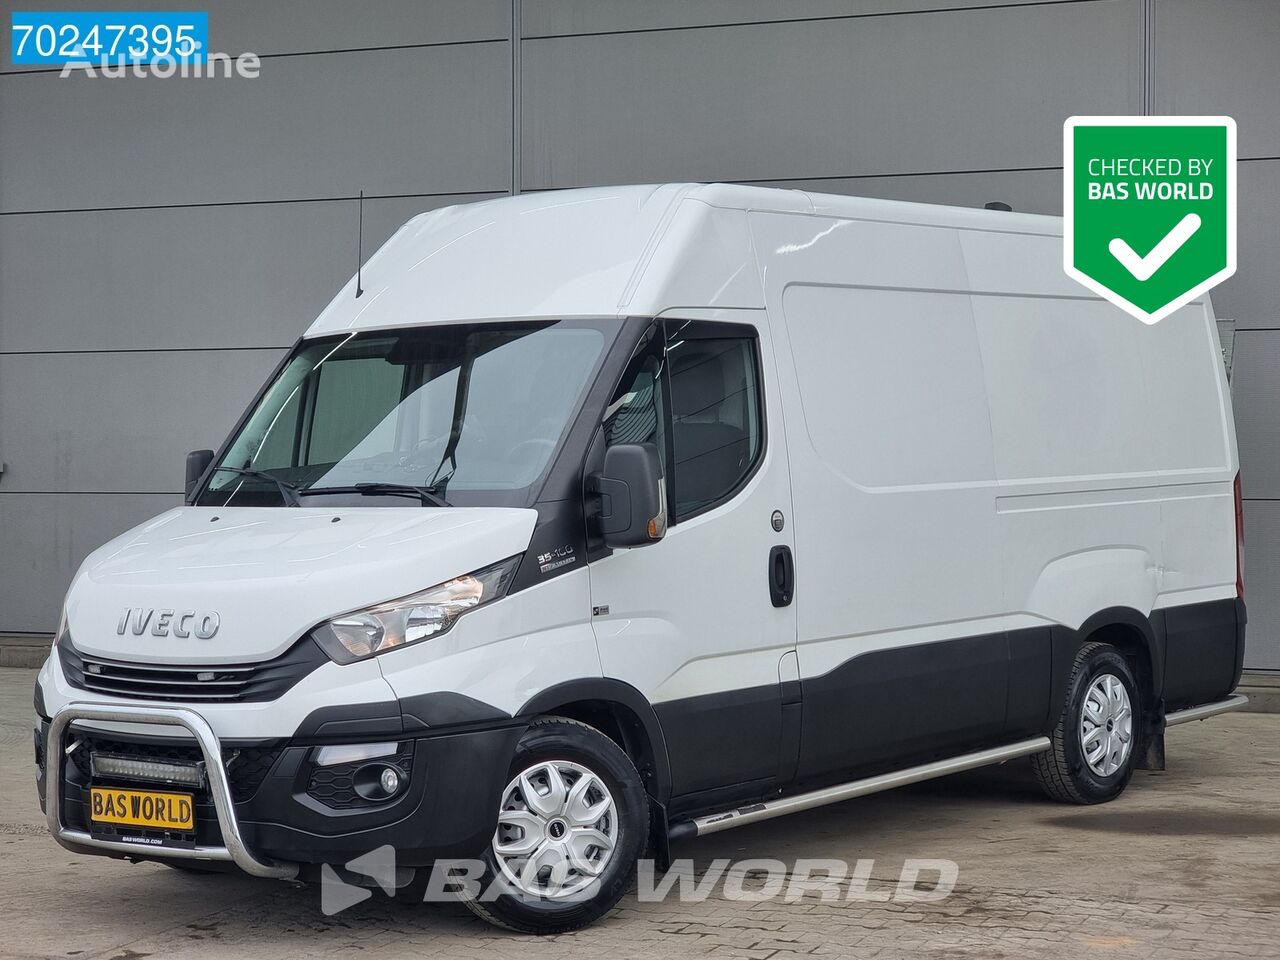 IVECO Daily 35S16 Automaat Laadklep L2H2 Camera Airco Cruise LBW 12m3  vieglais furgons